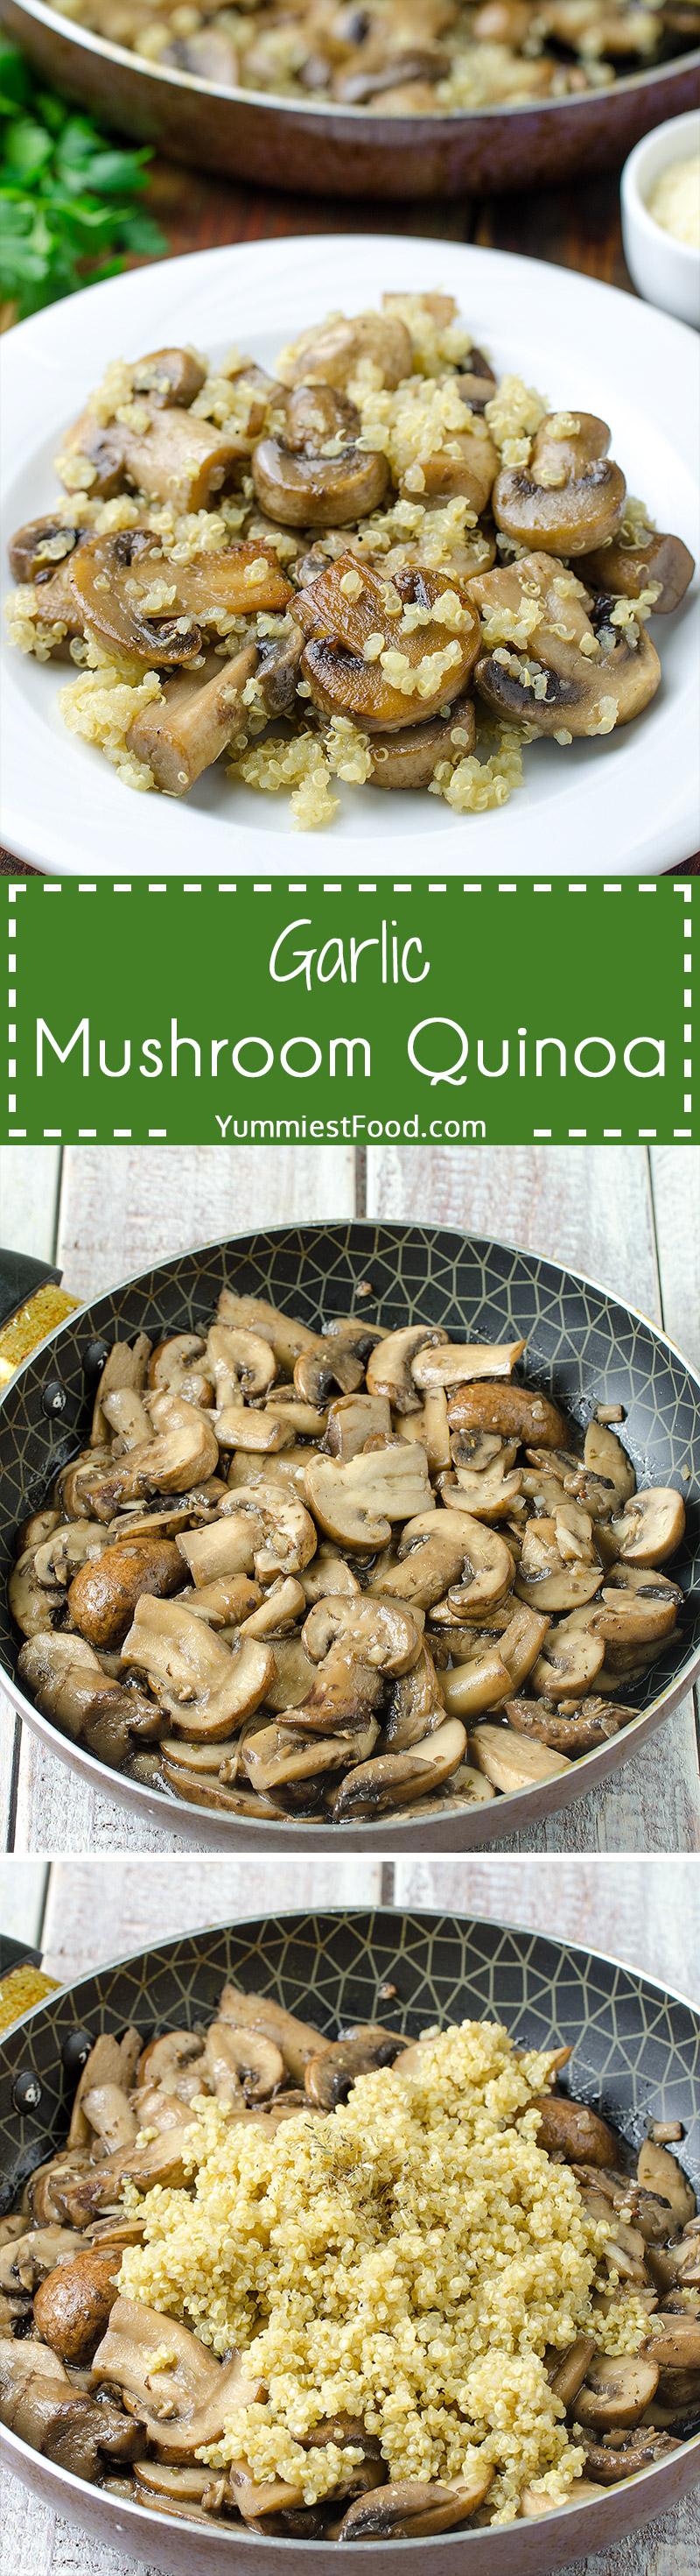 GARLIC MUSHROOM QUINOA - a simple, healthy and gluten free side dish ready in 15 minutes